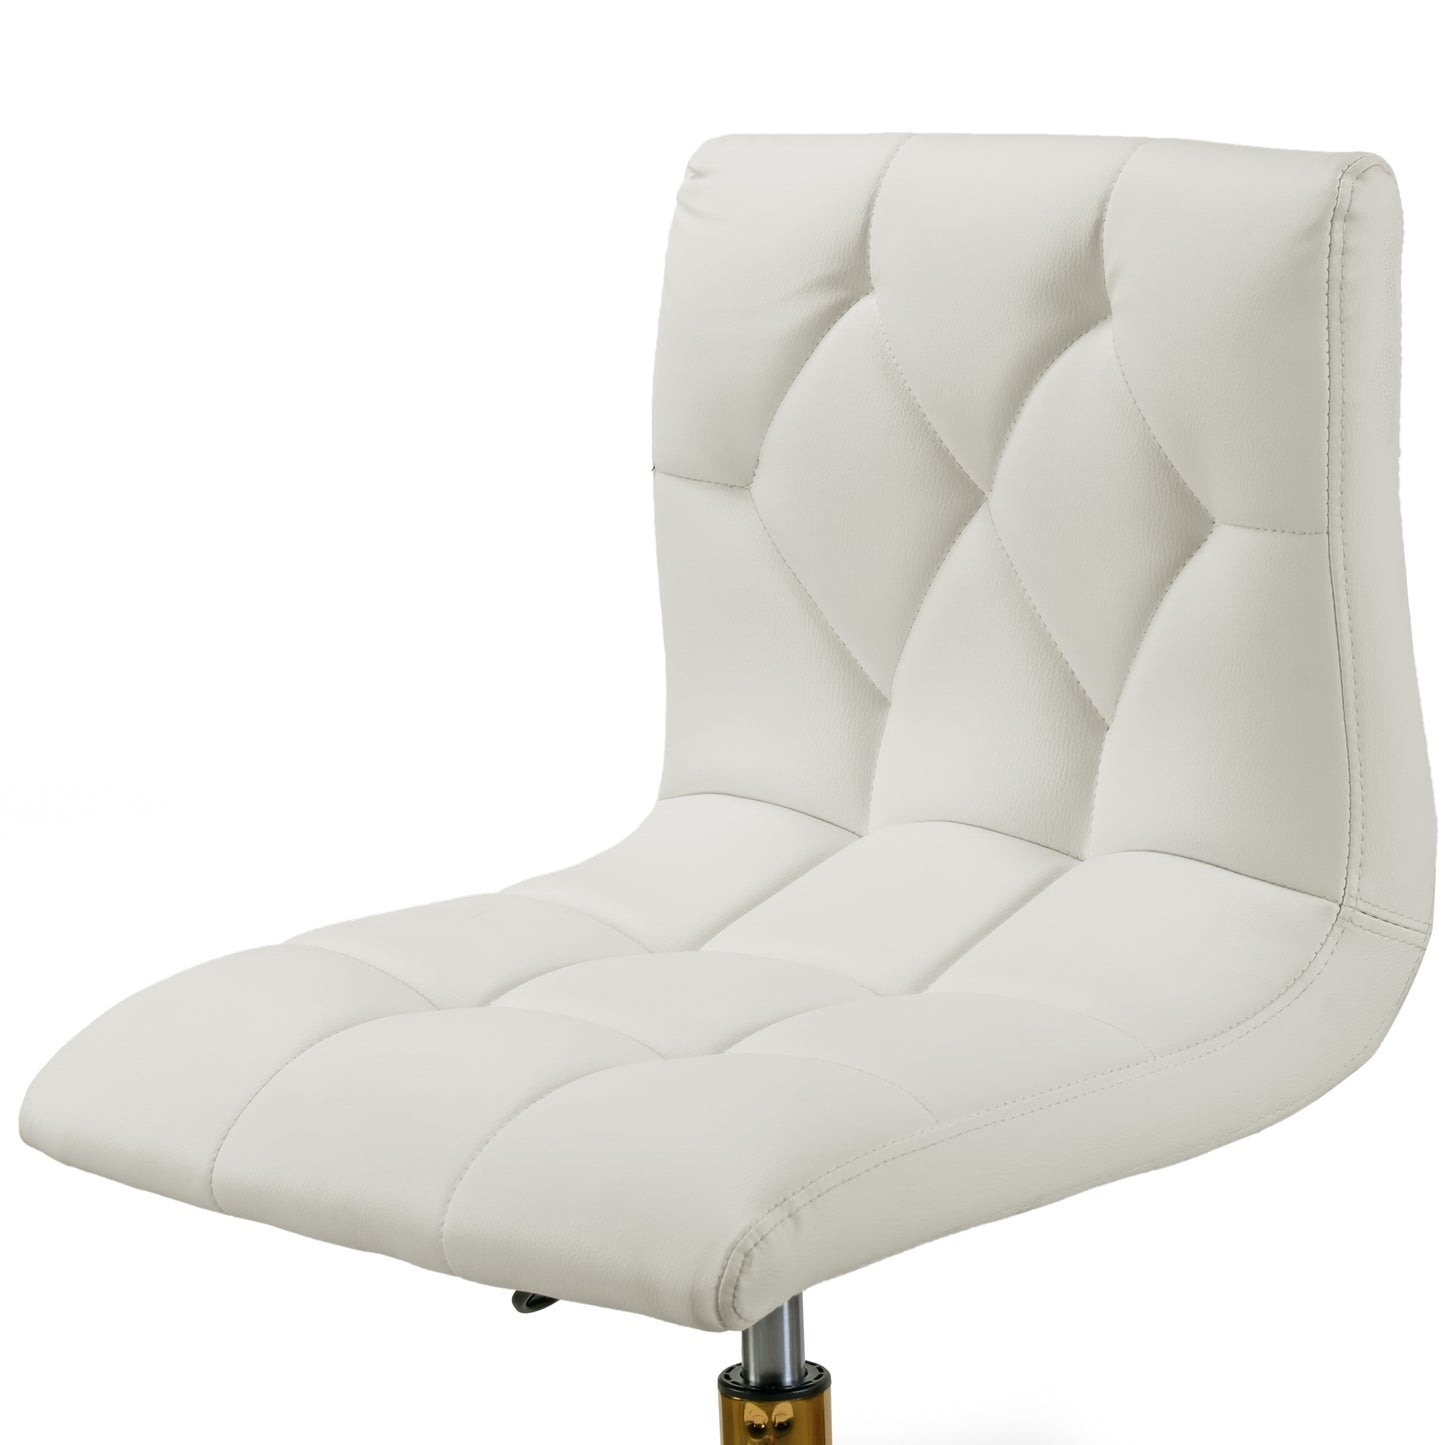 Aman Cream Upholstered Adjustable Height Swivel Office Chair with Golden Frame Wheel Base